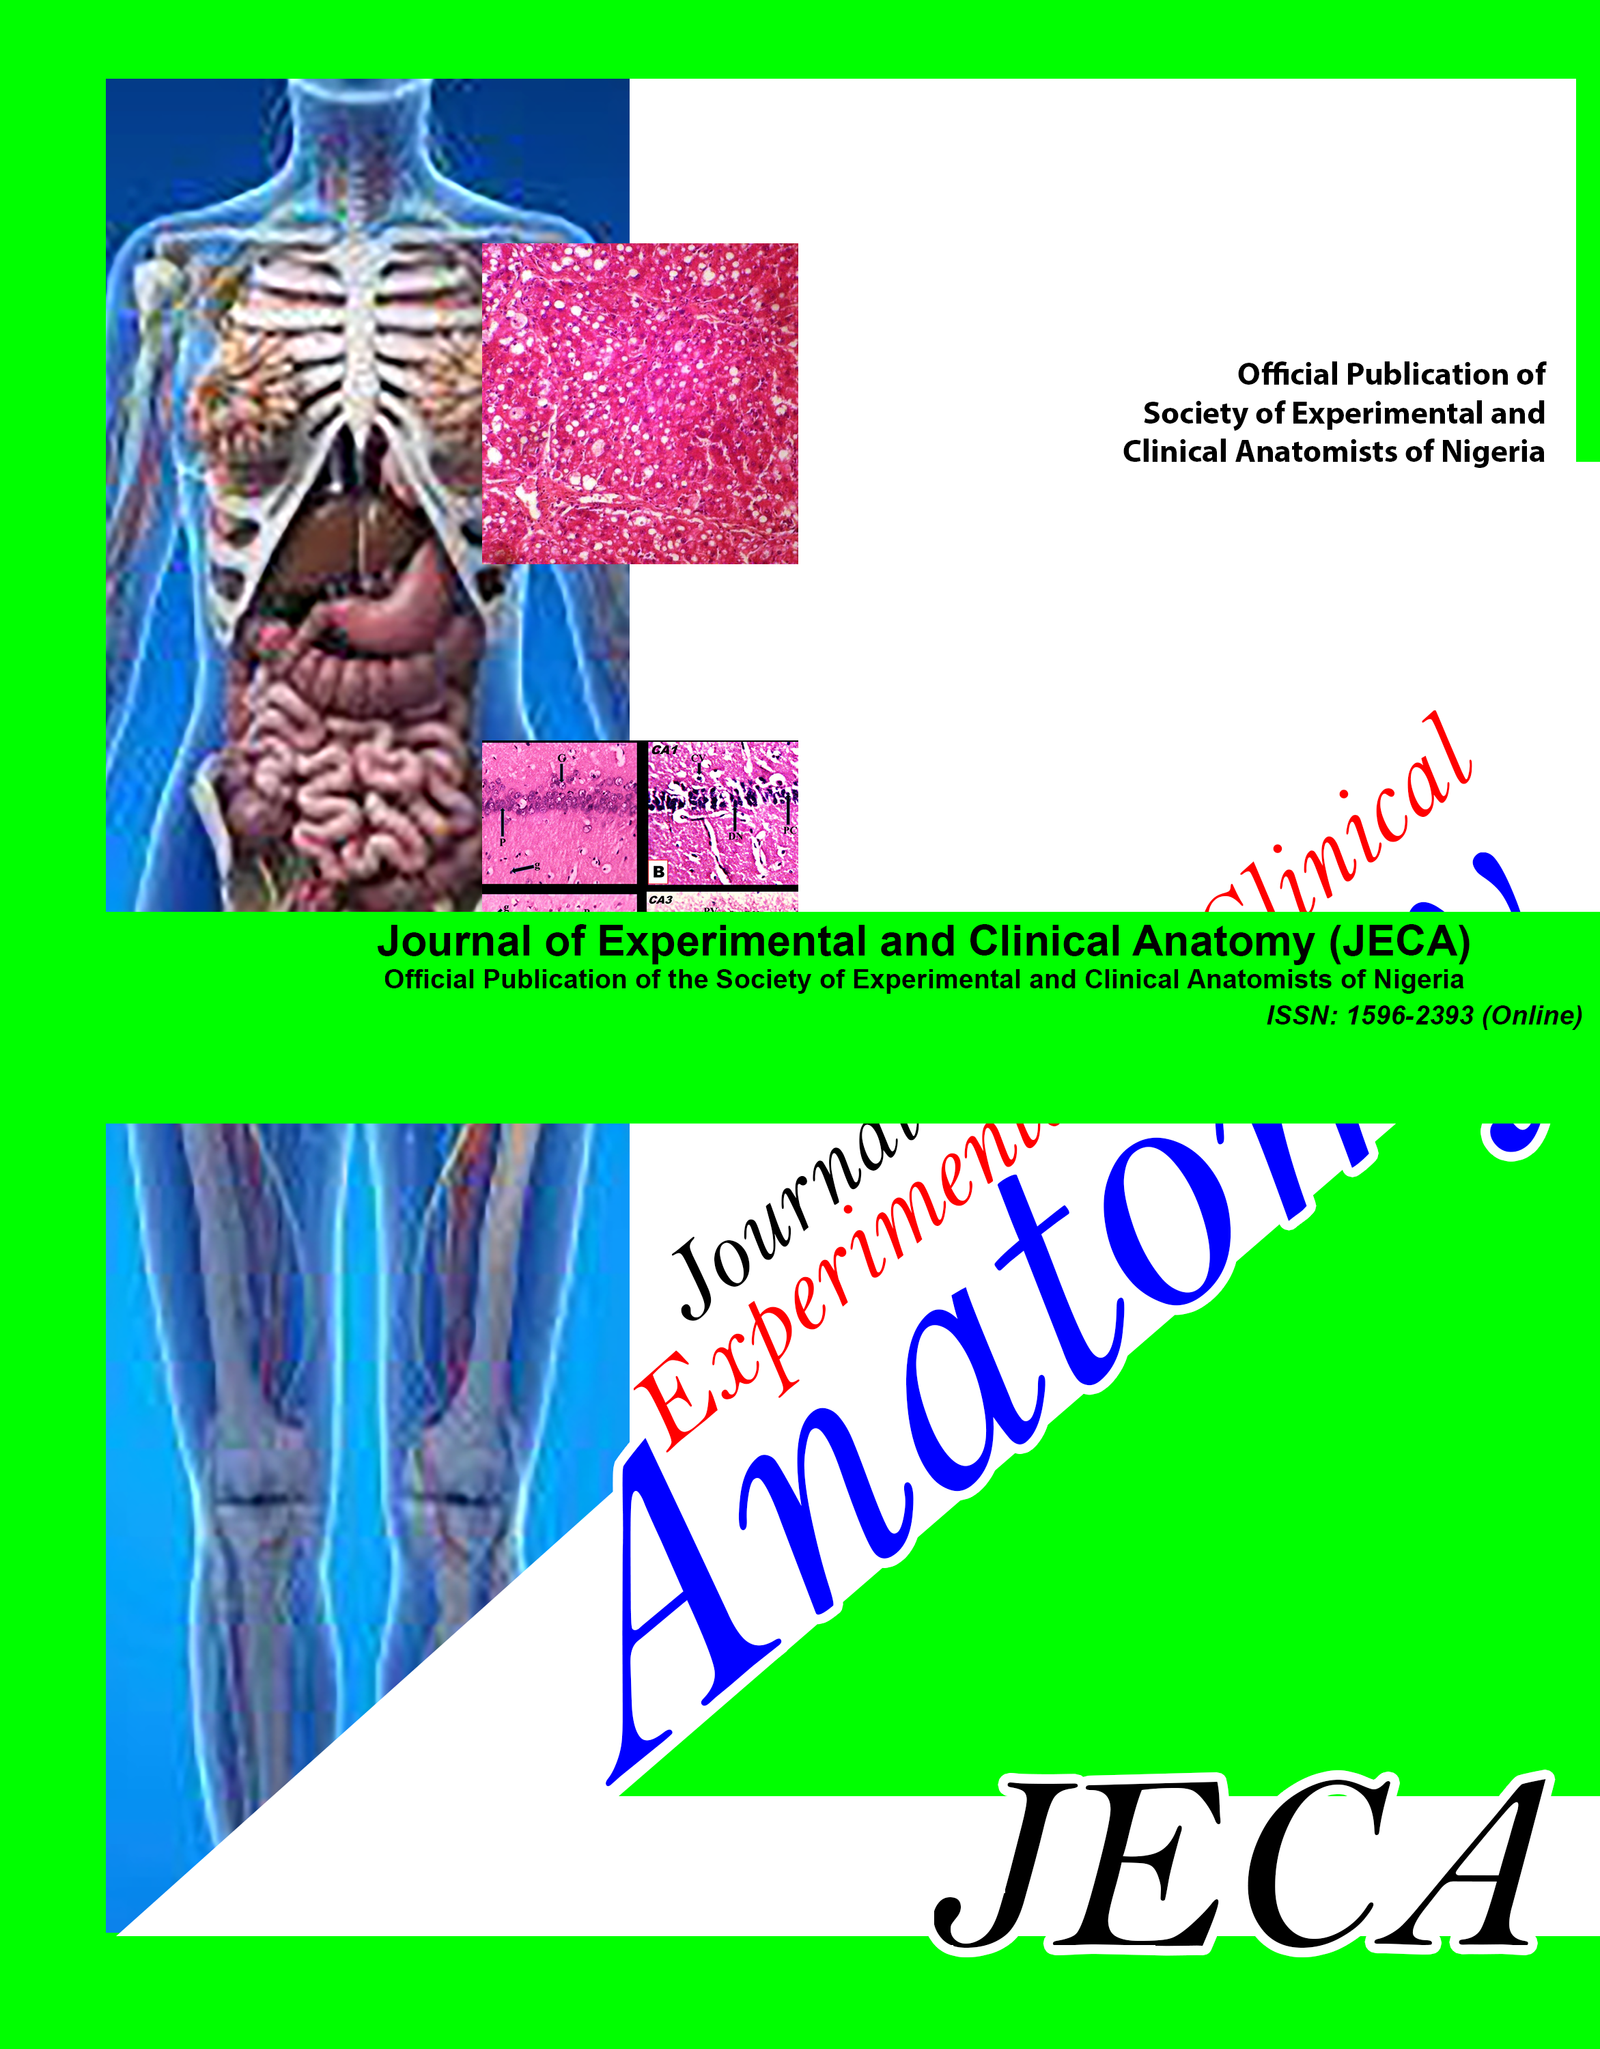 Journal of Experimental and Clinical Anatomy